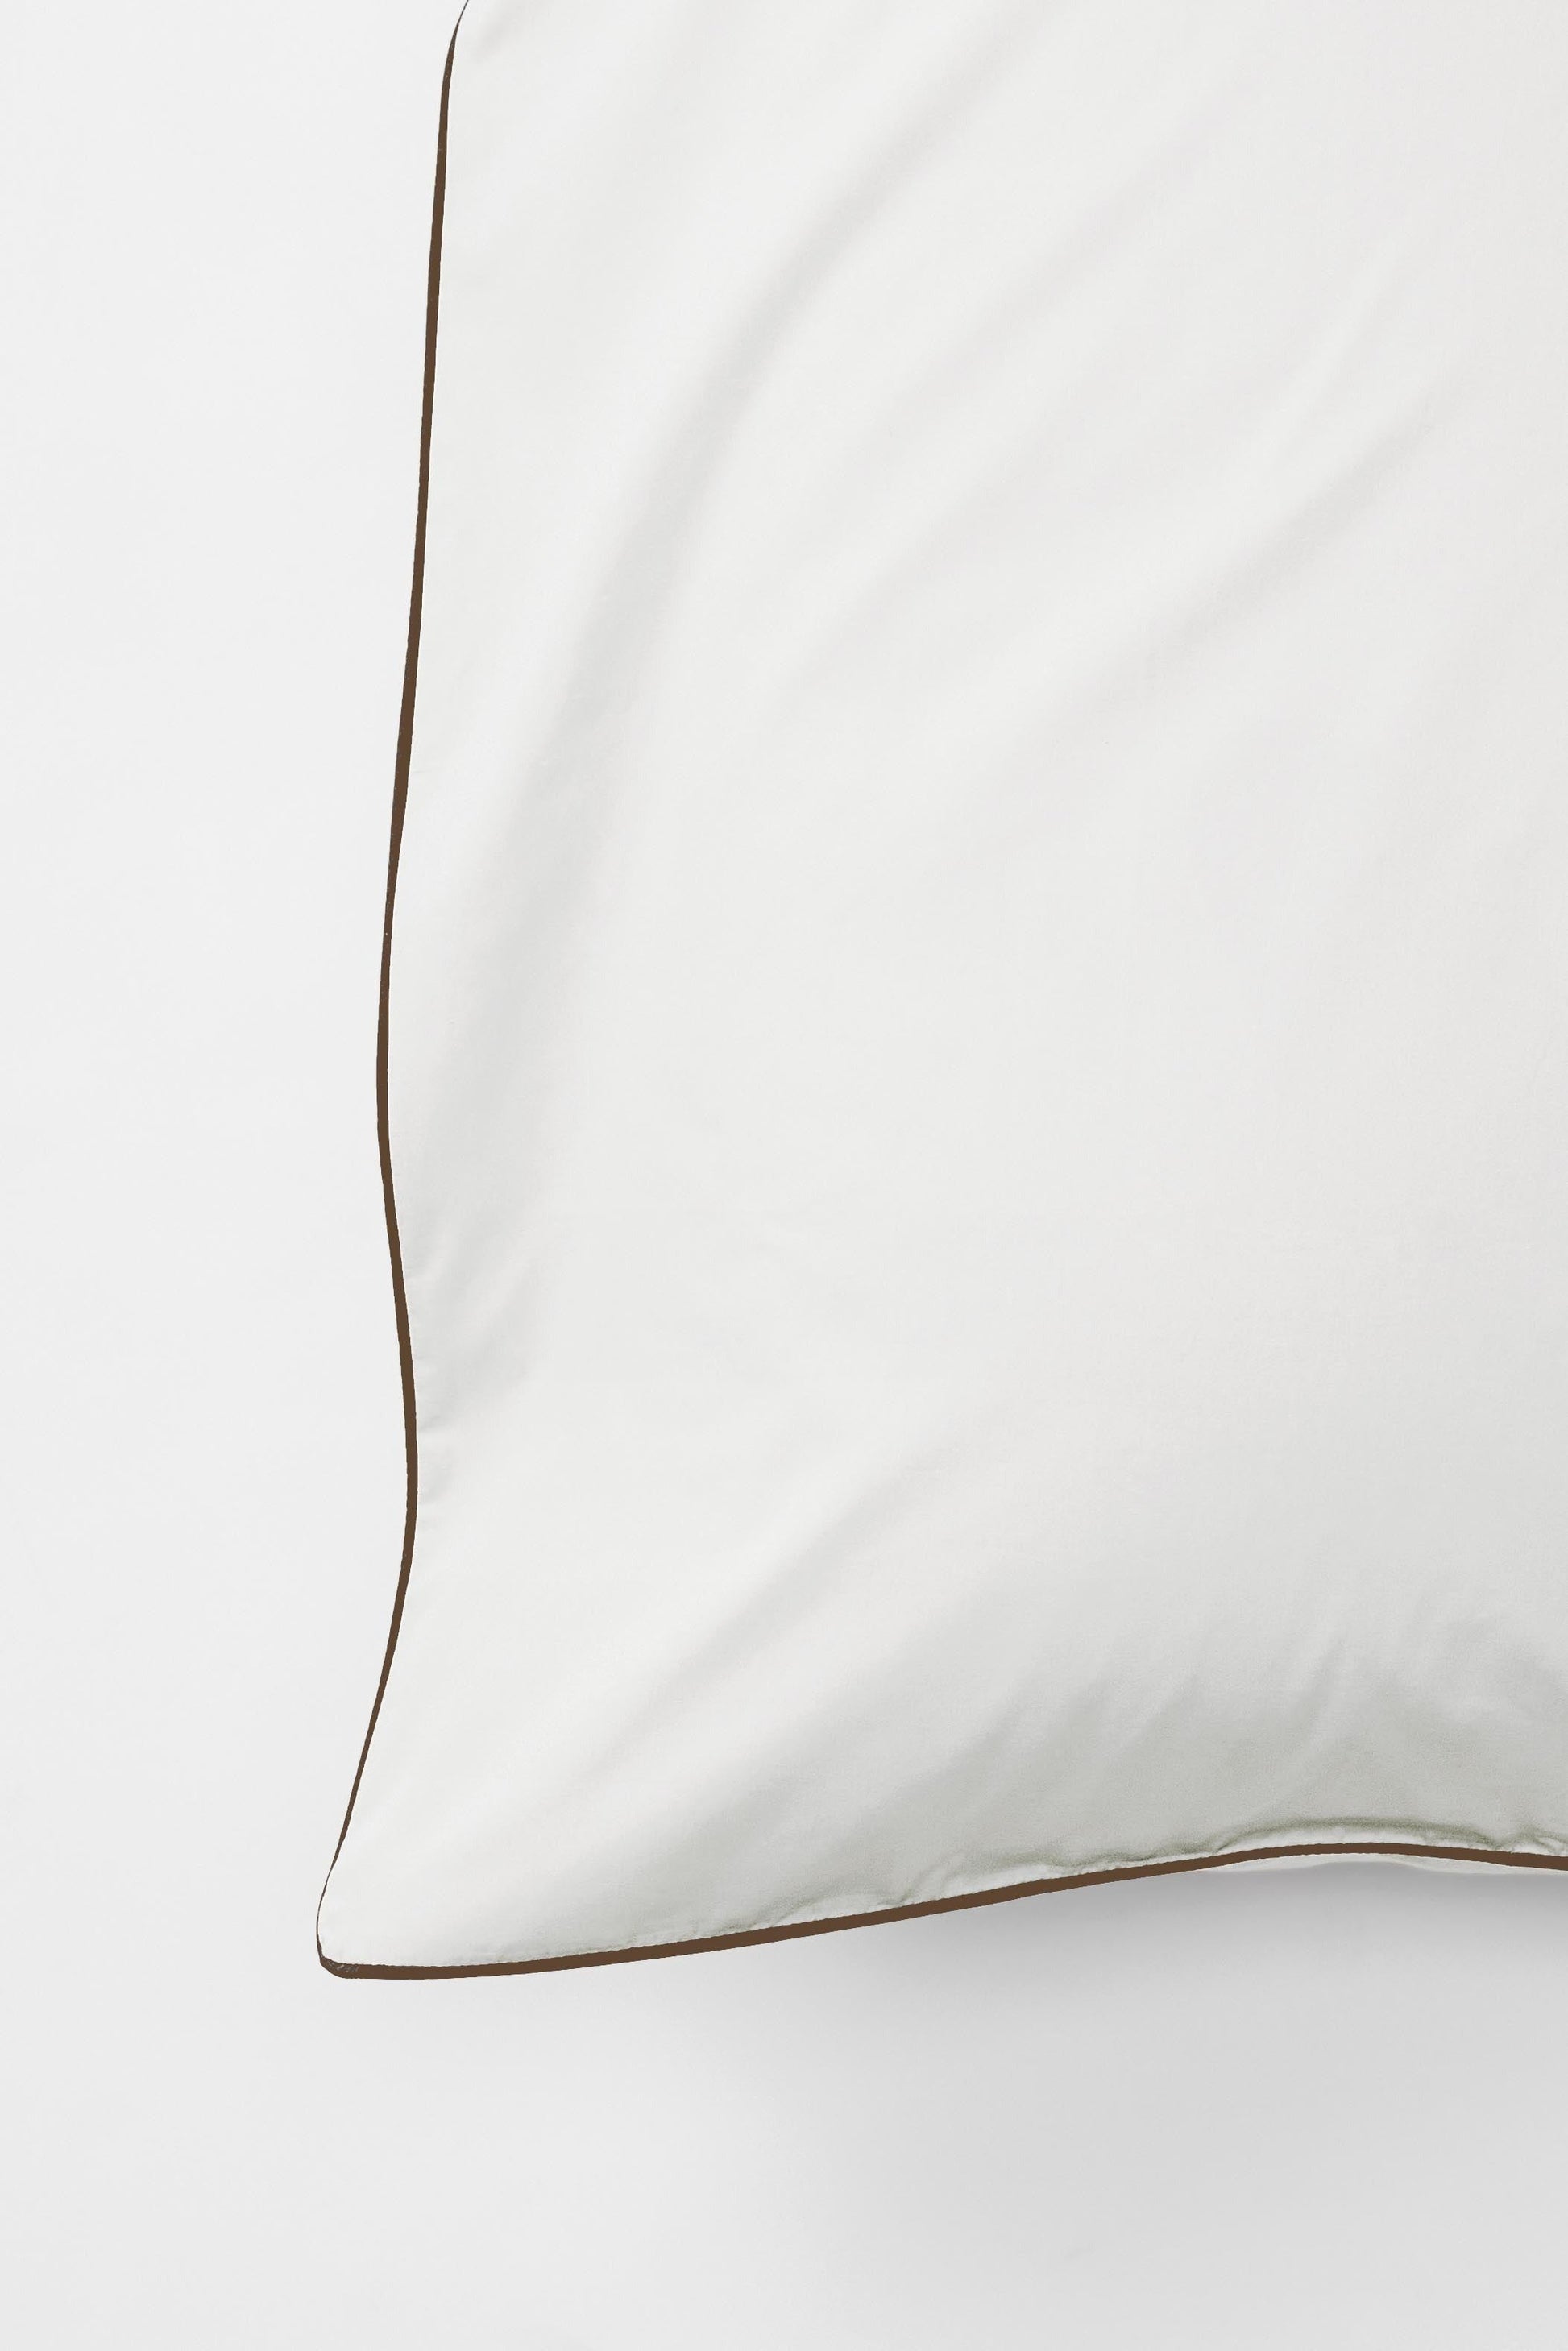 Contrast Edge Organic Cotton Percale Pillow Pair - Prism with Carob Pillows in Euro Pillow